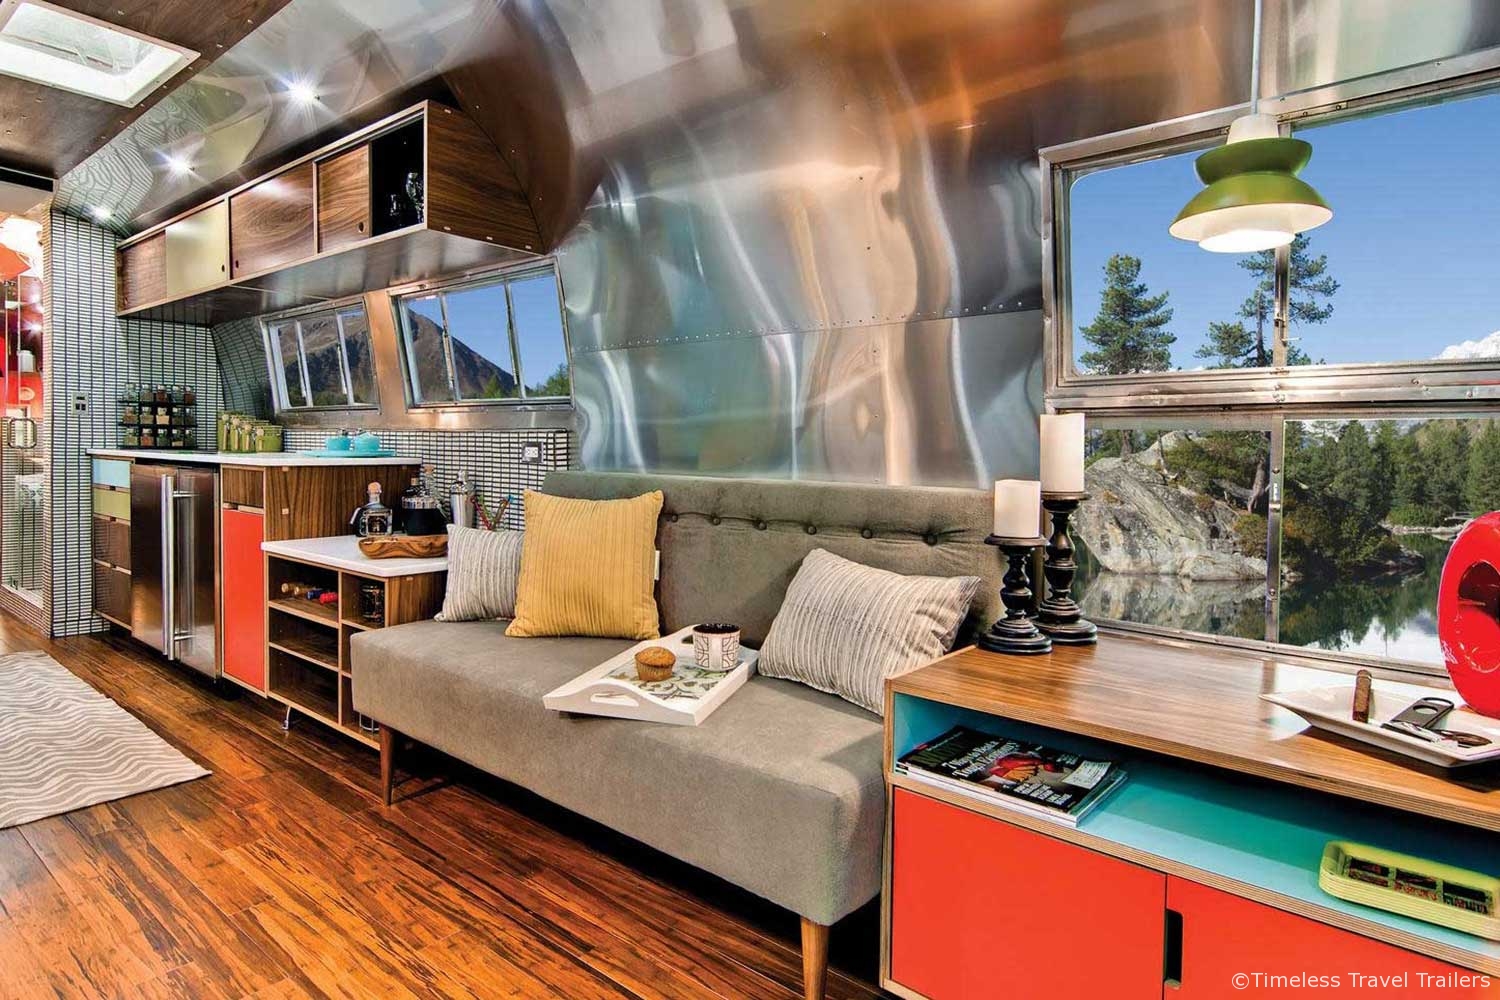 Western Pacific Vintage Airstream by Timeless Travel Trailers